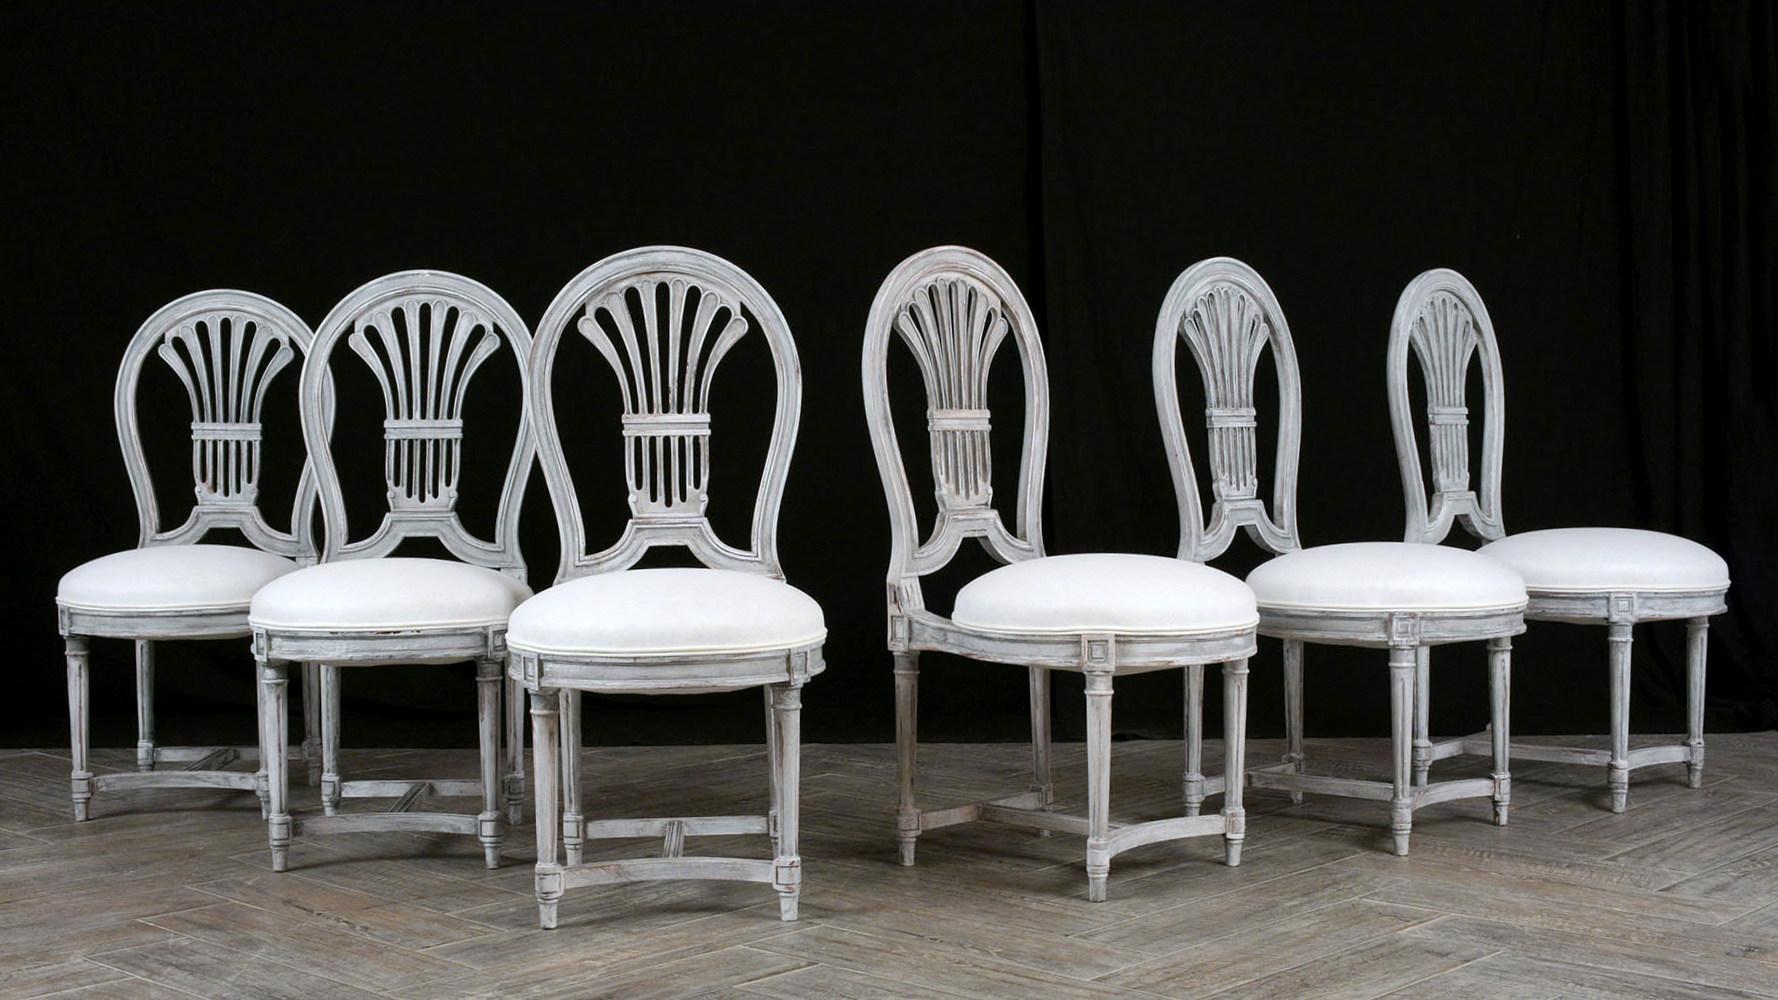 This Set of Six Elegant Dining Chairs made out of mahogany wood with carved back details are in great condition and are newly painted in a beautiful pale gray color with a distressed finish. The seats have been professionally reupholstered in a new